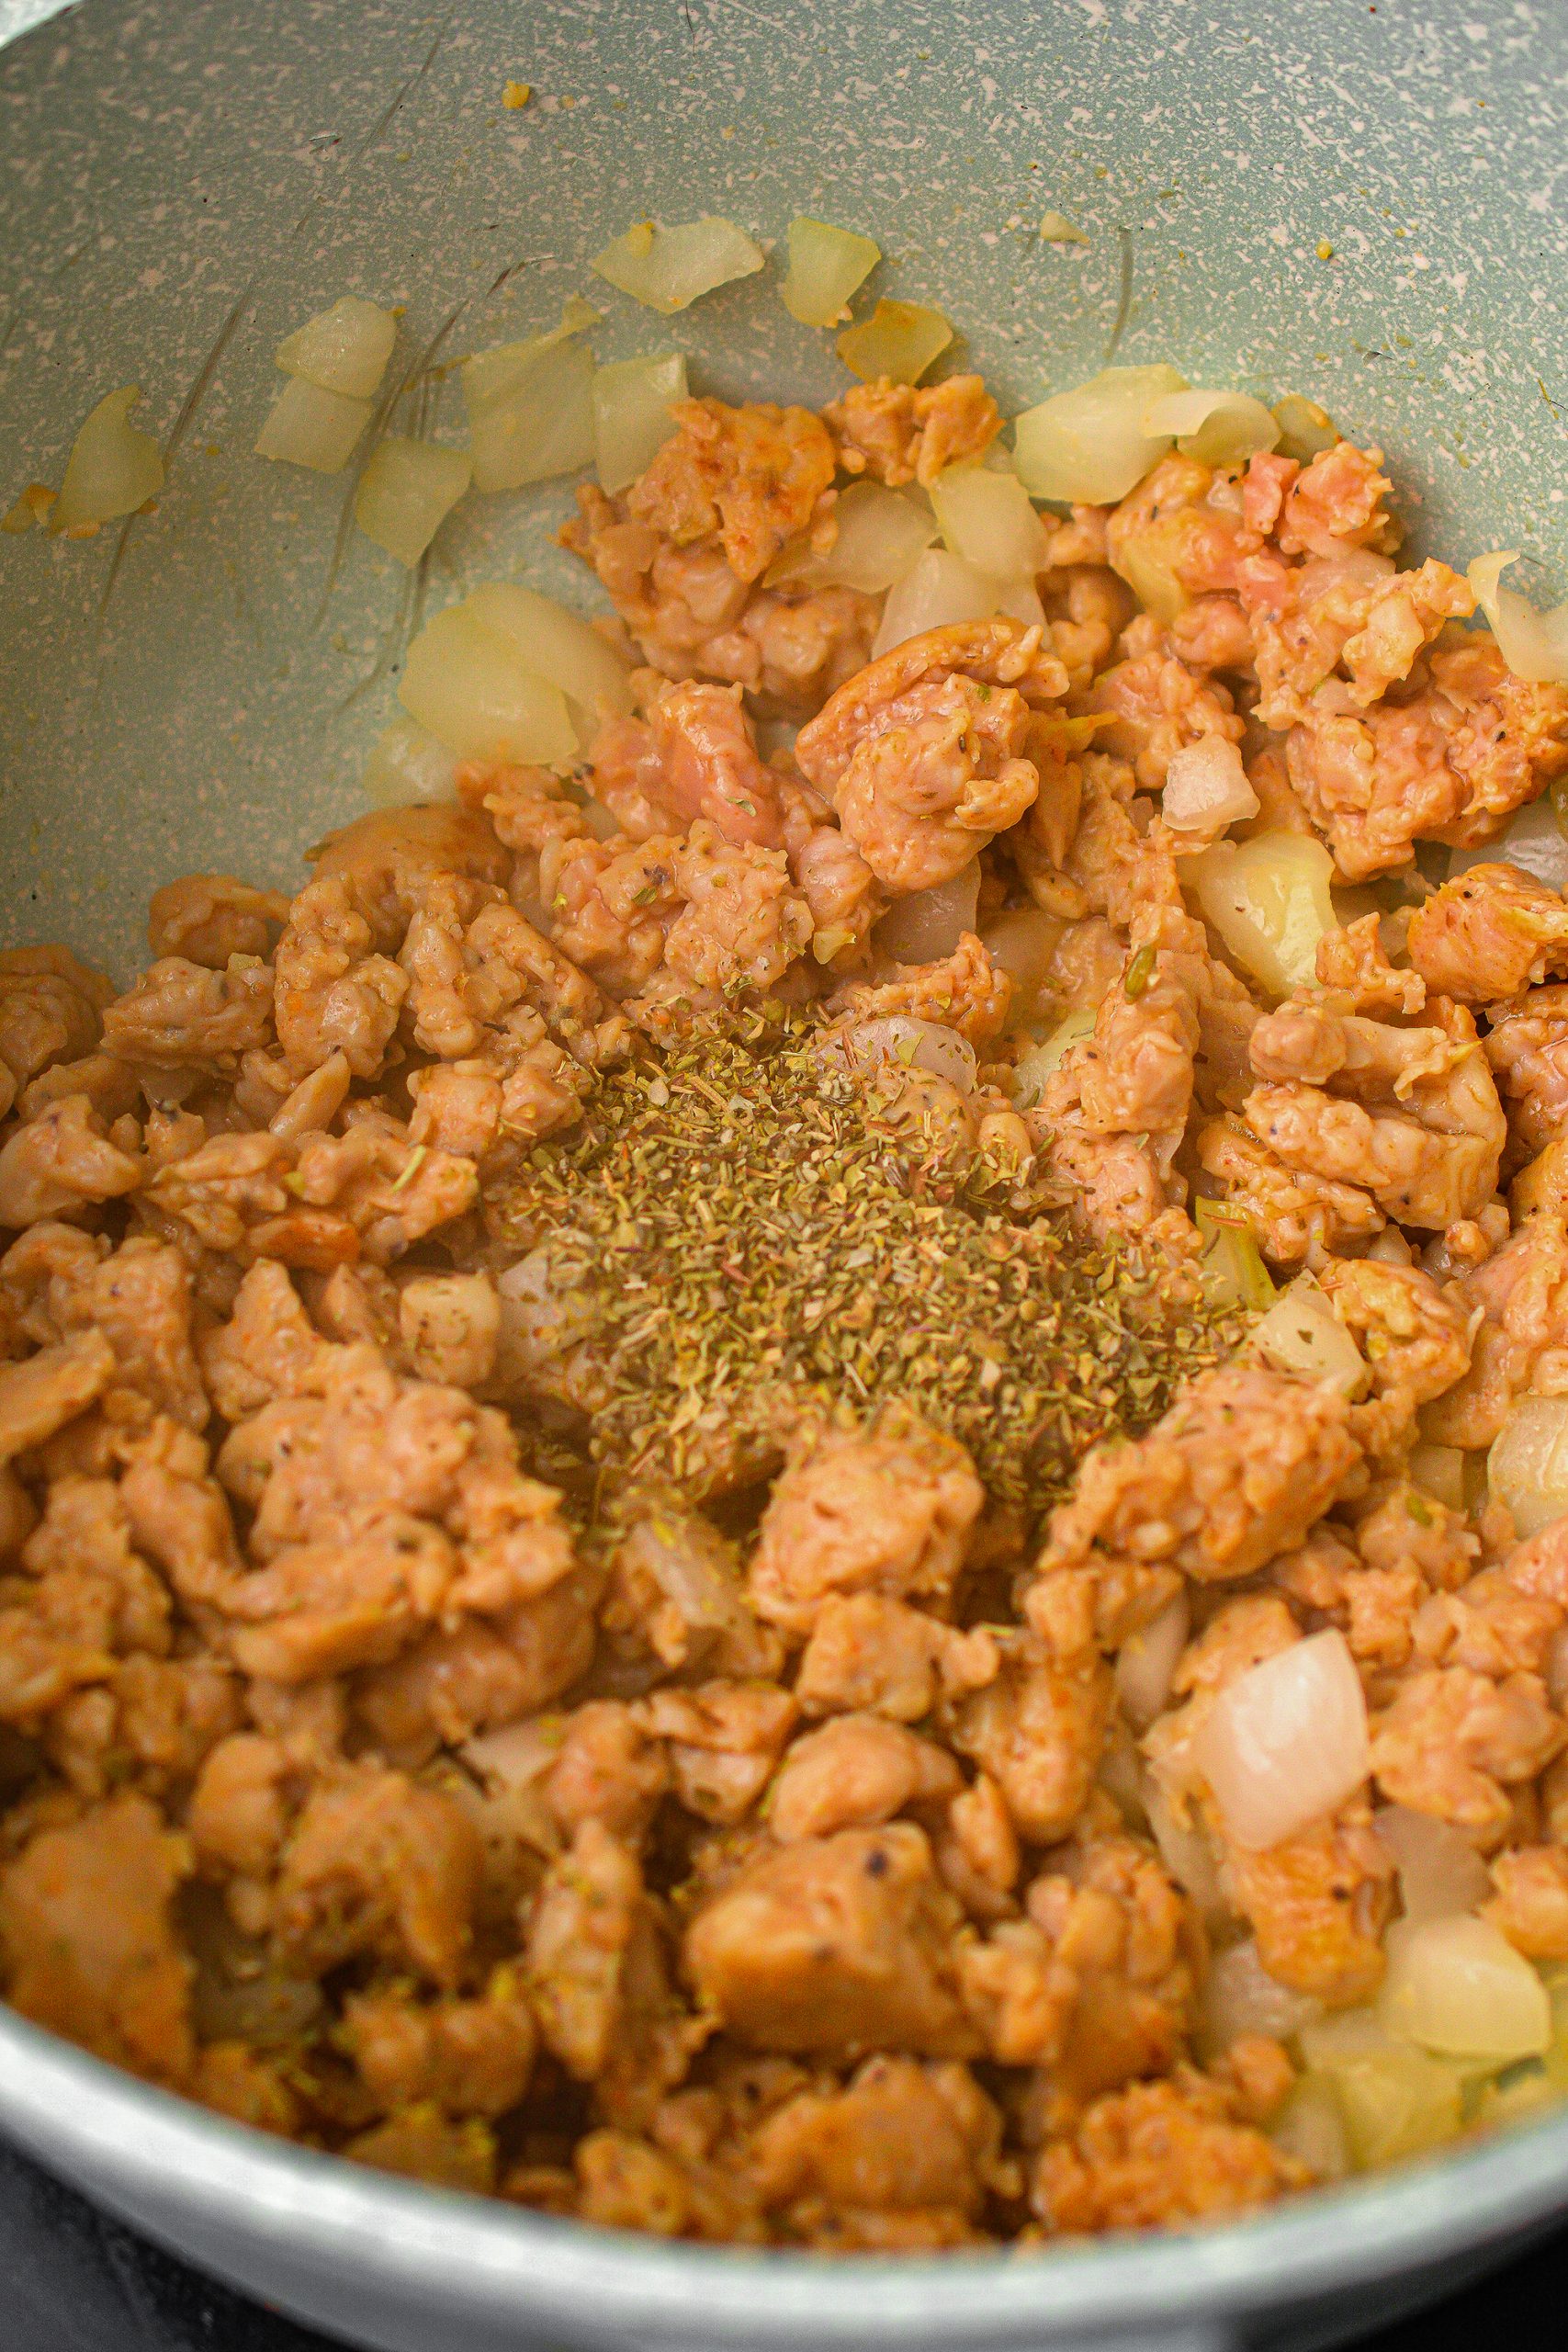  Mix in the minced garlic and saute another 30 seconds.